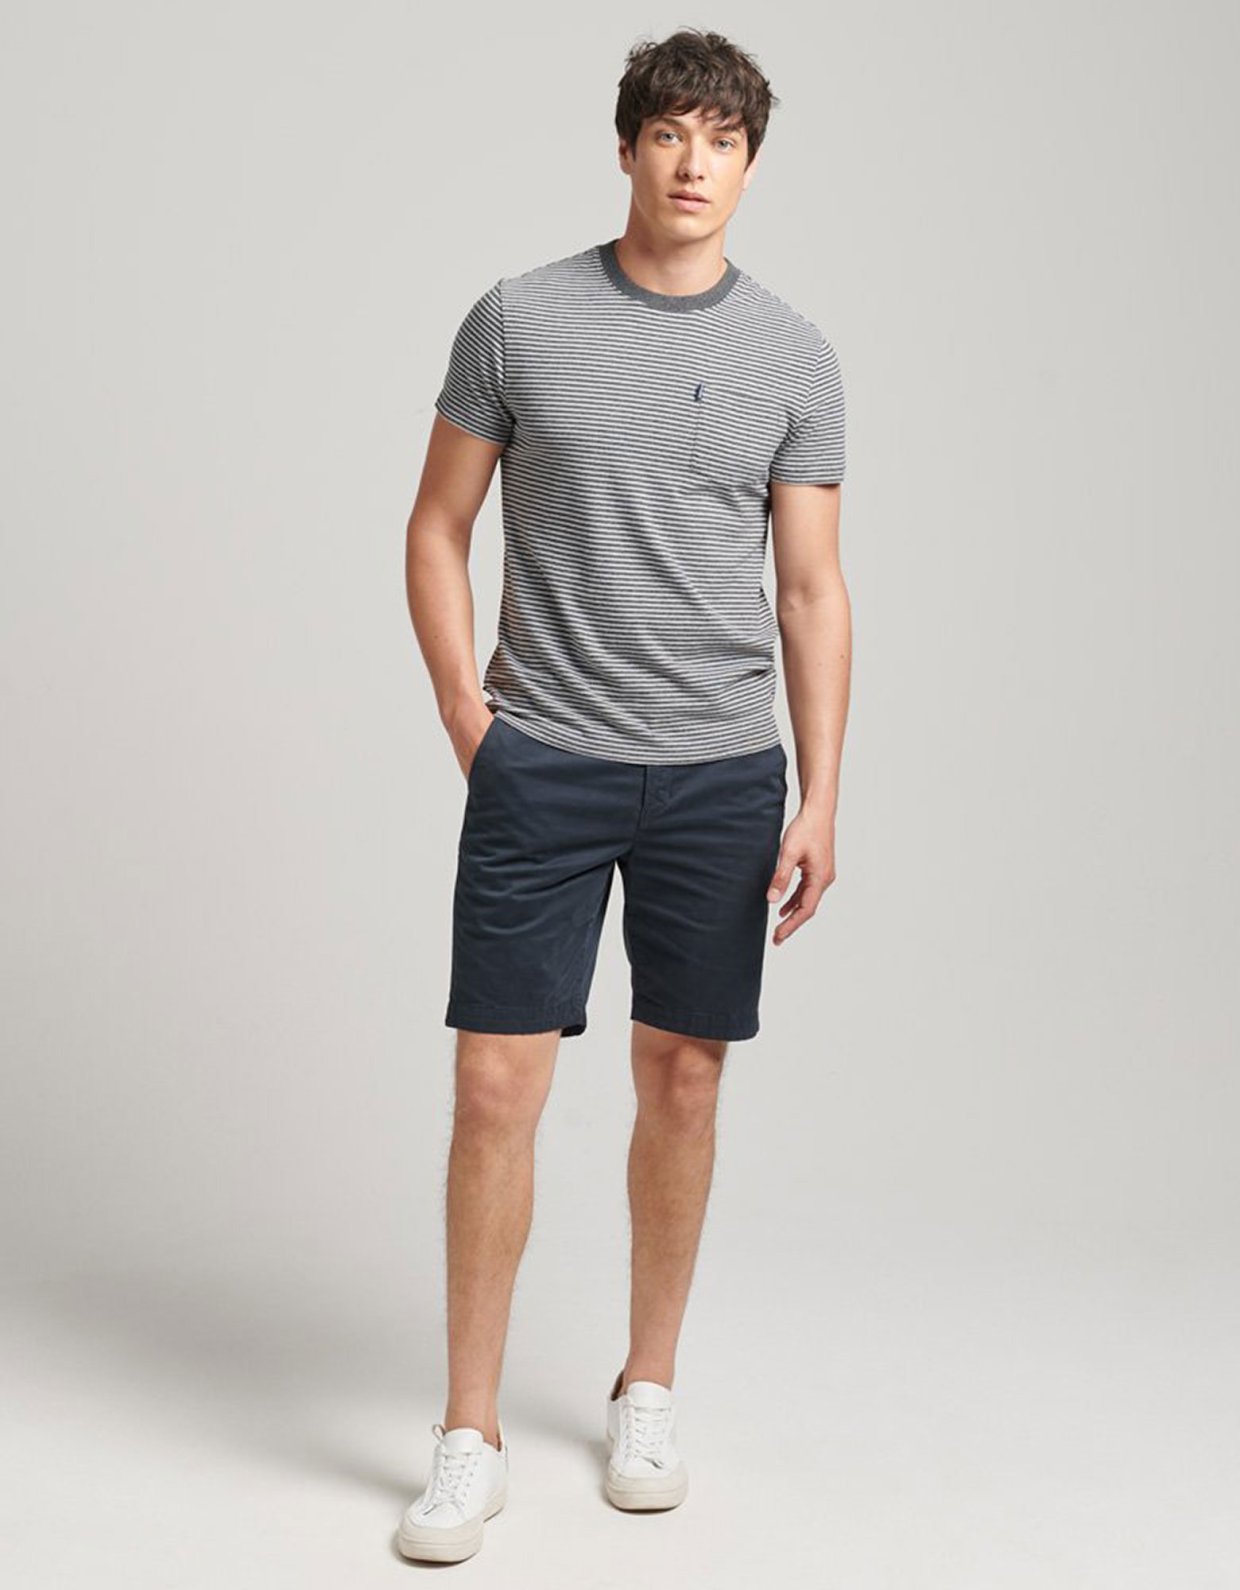 Superdry Studios core chino shorts eclipse navy